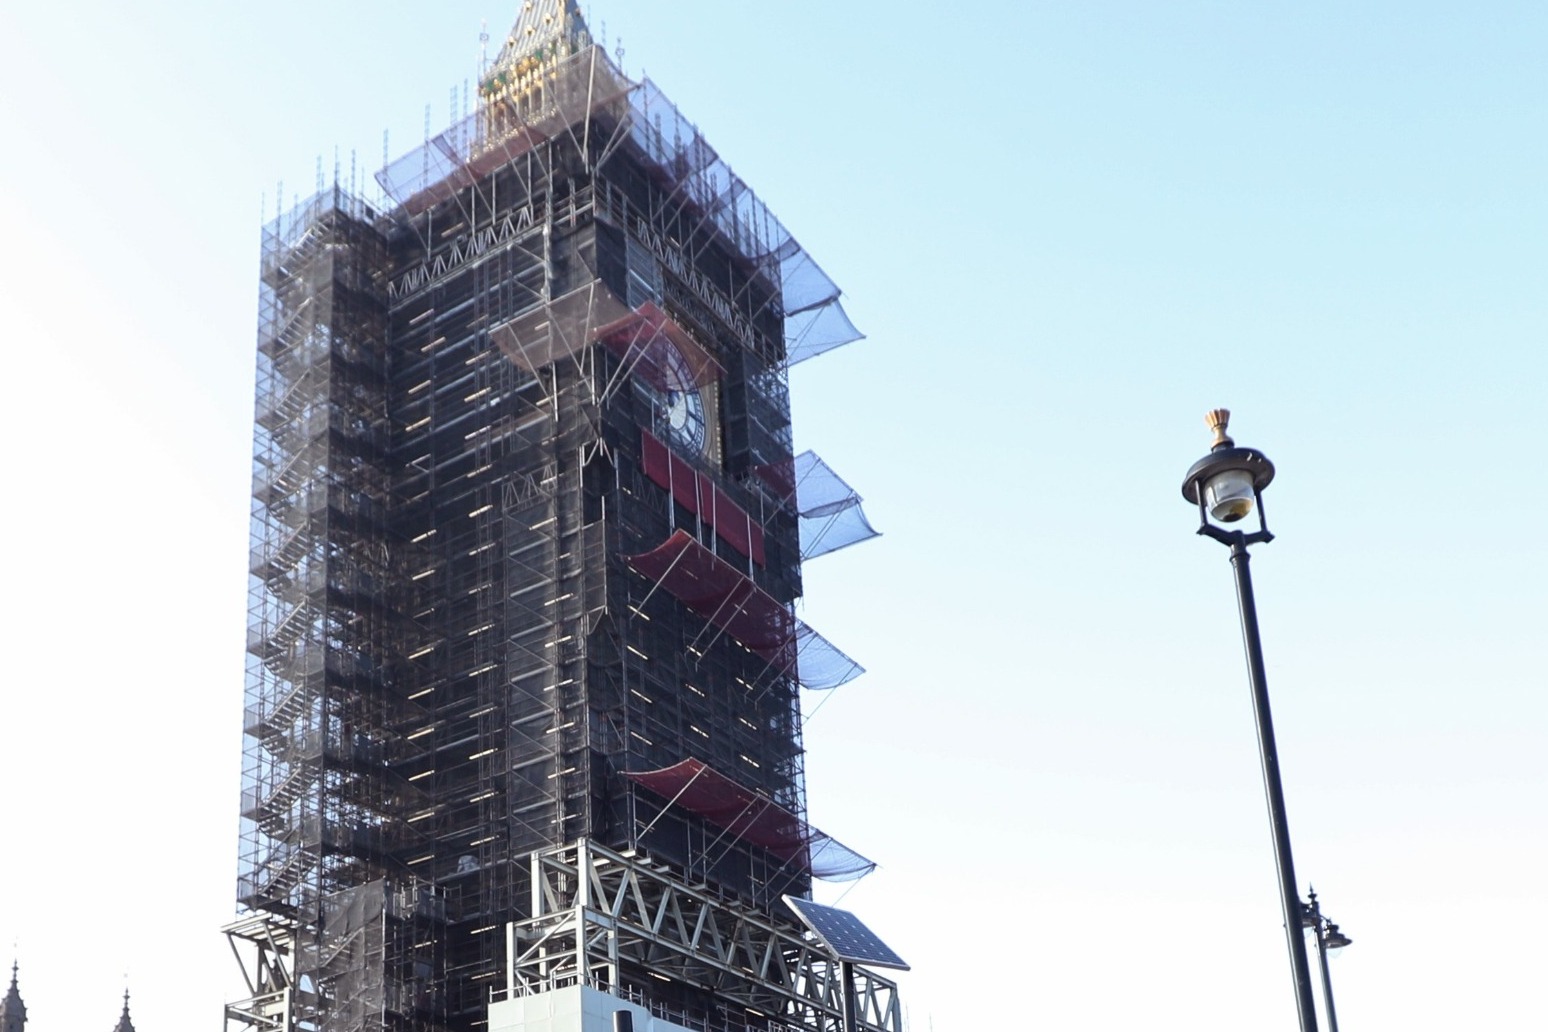 Big Ben tower restoration to be completed in 2022 